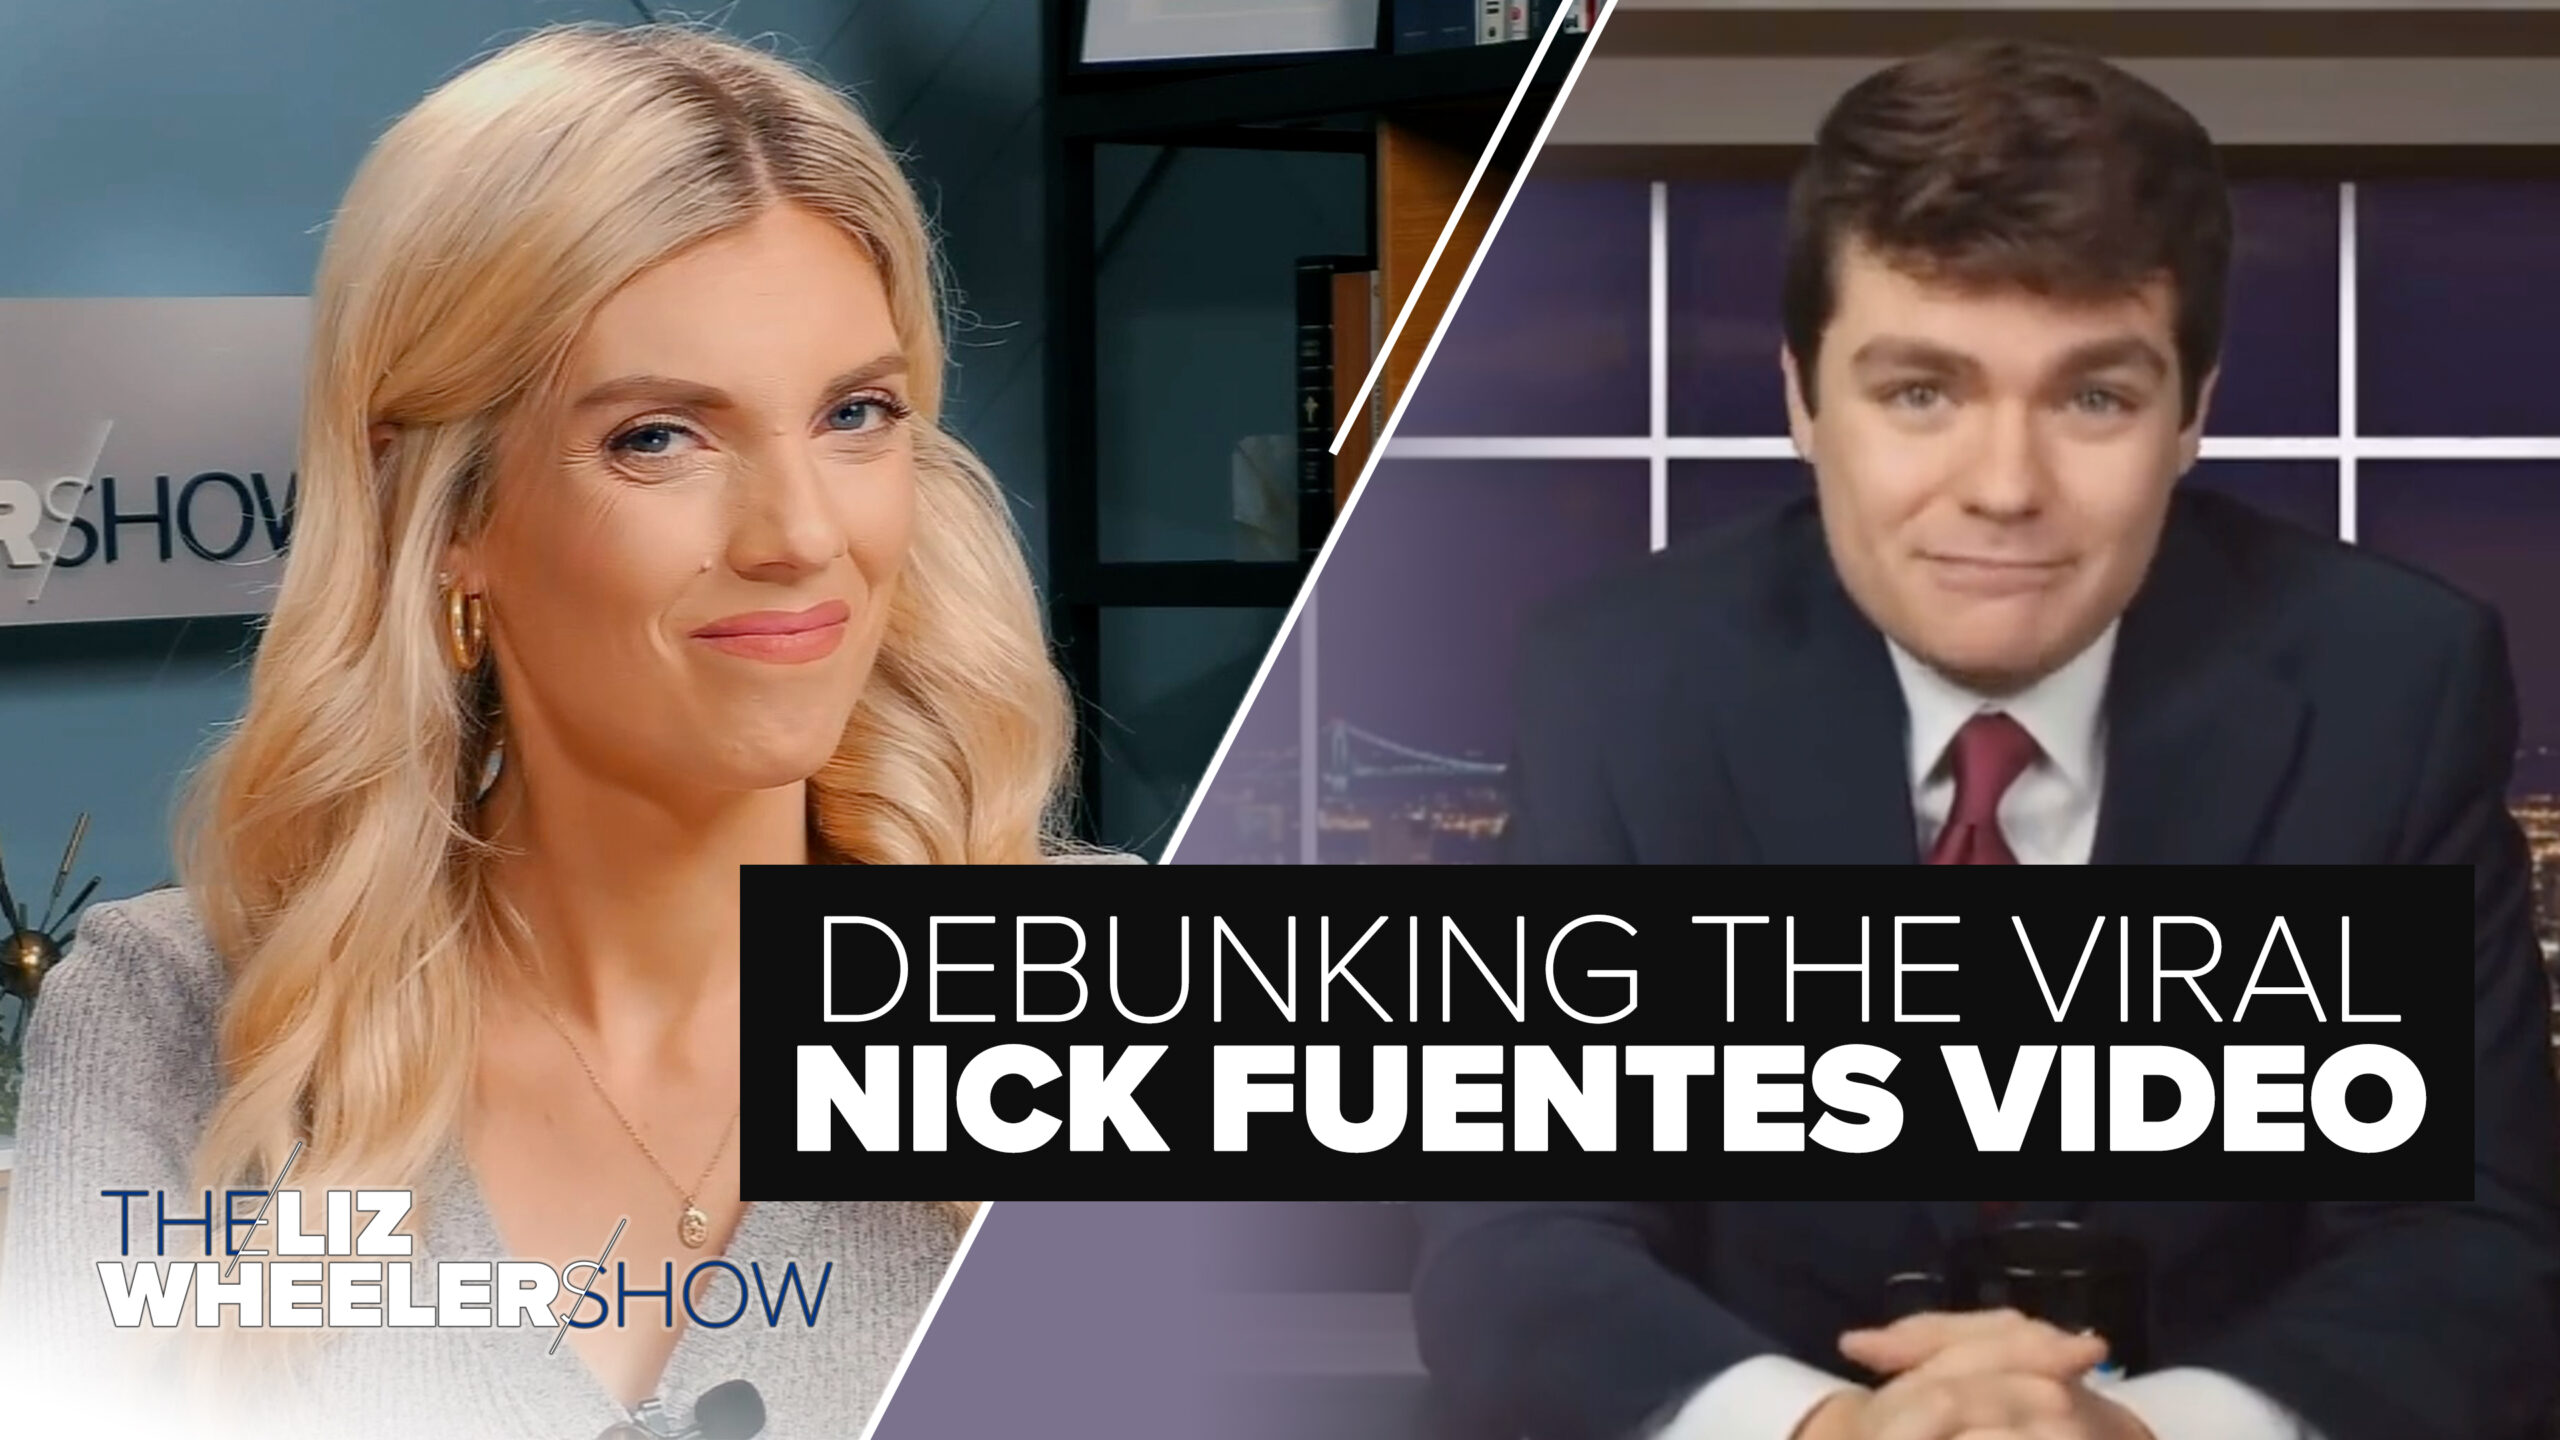 Infamous anti-Semite Nick Fuentes appears on his television show.